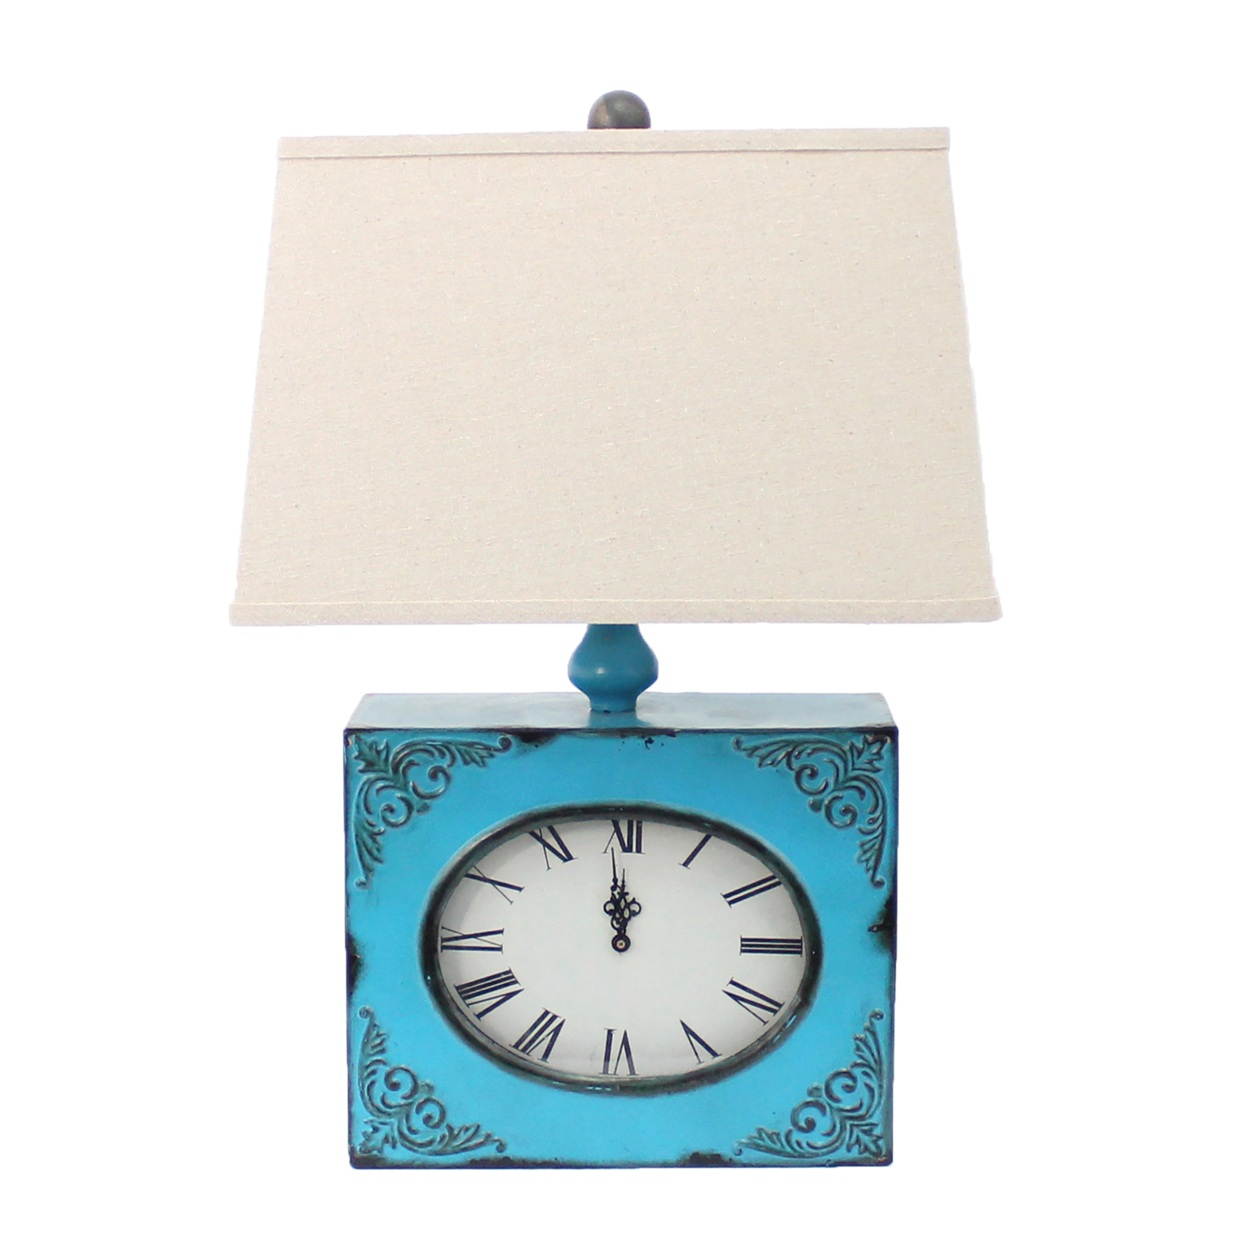 Clock Design Metal Table Lamp With Tapered Shade, Blue And Beige- Saltoro Sherpi